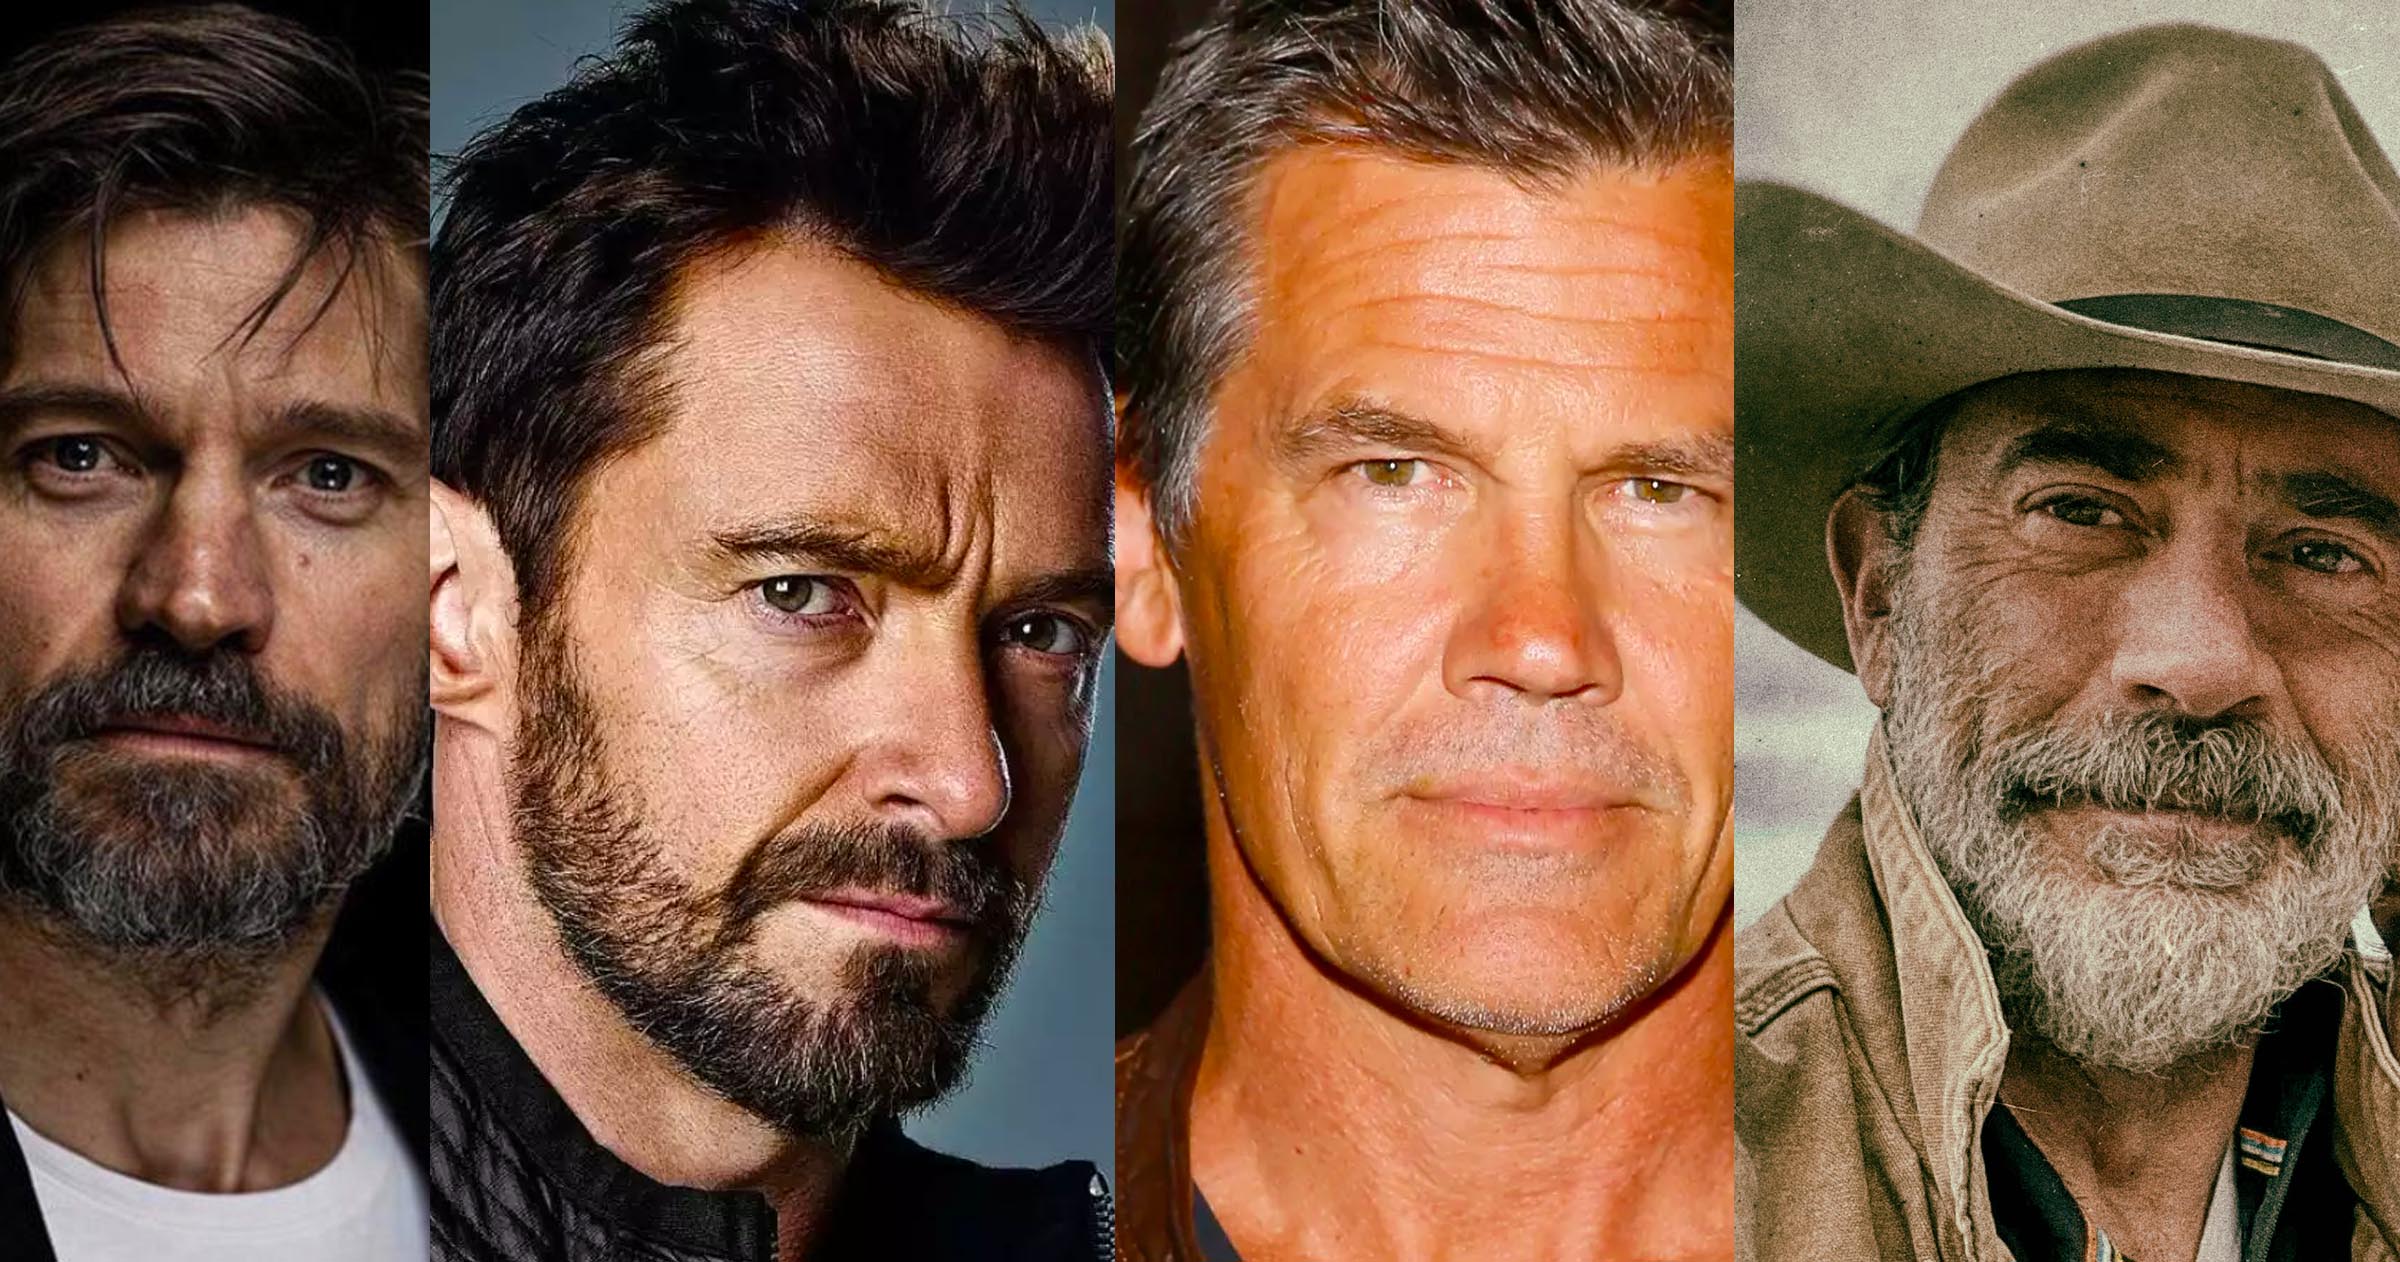 The Last of Us HBO Series: 5 actors who could play Joel